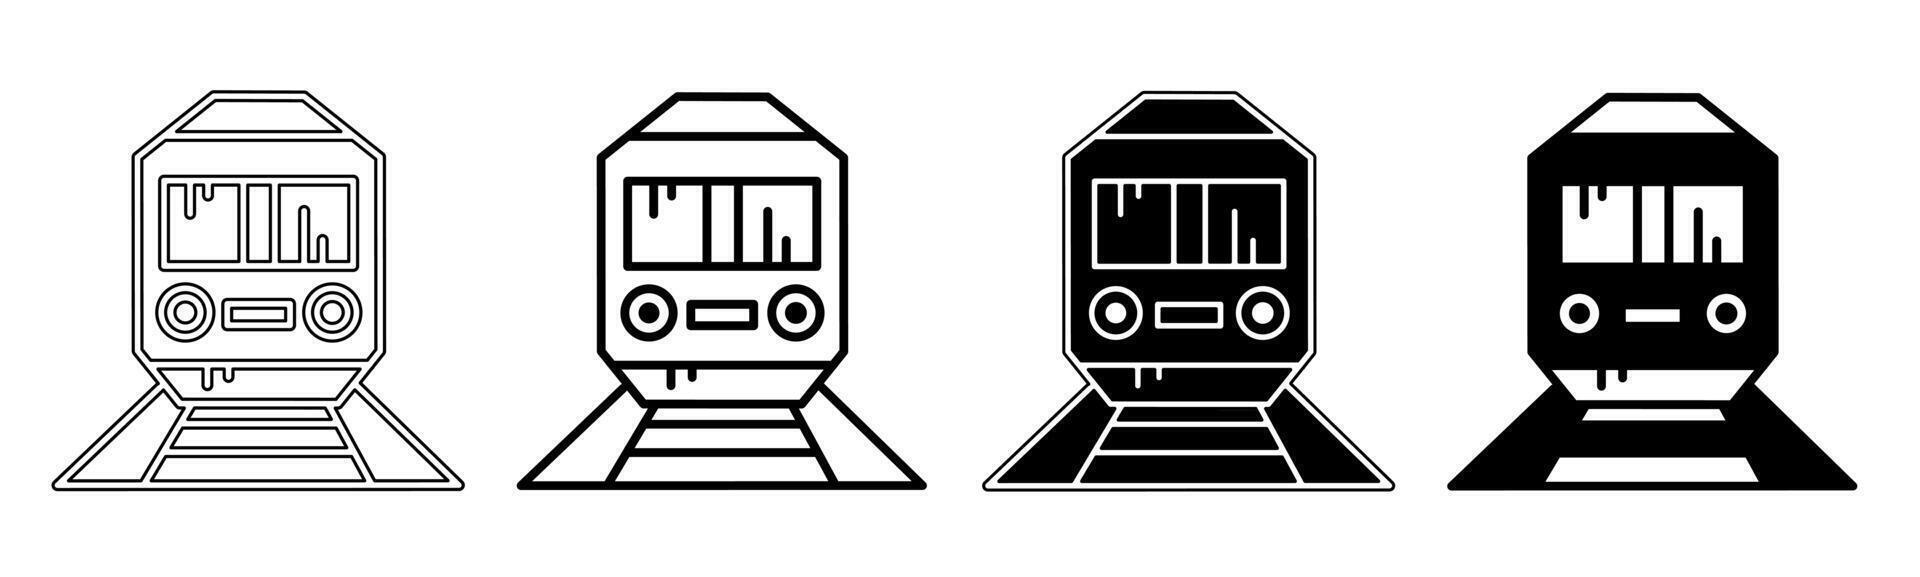 Black and white illustration of a train. Train icon collection with line. Stock vector illustration.